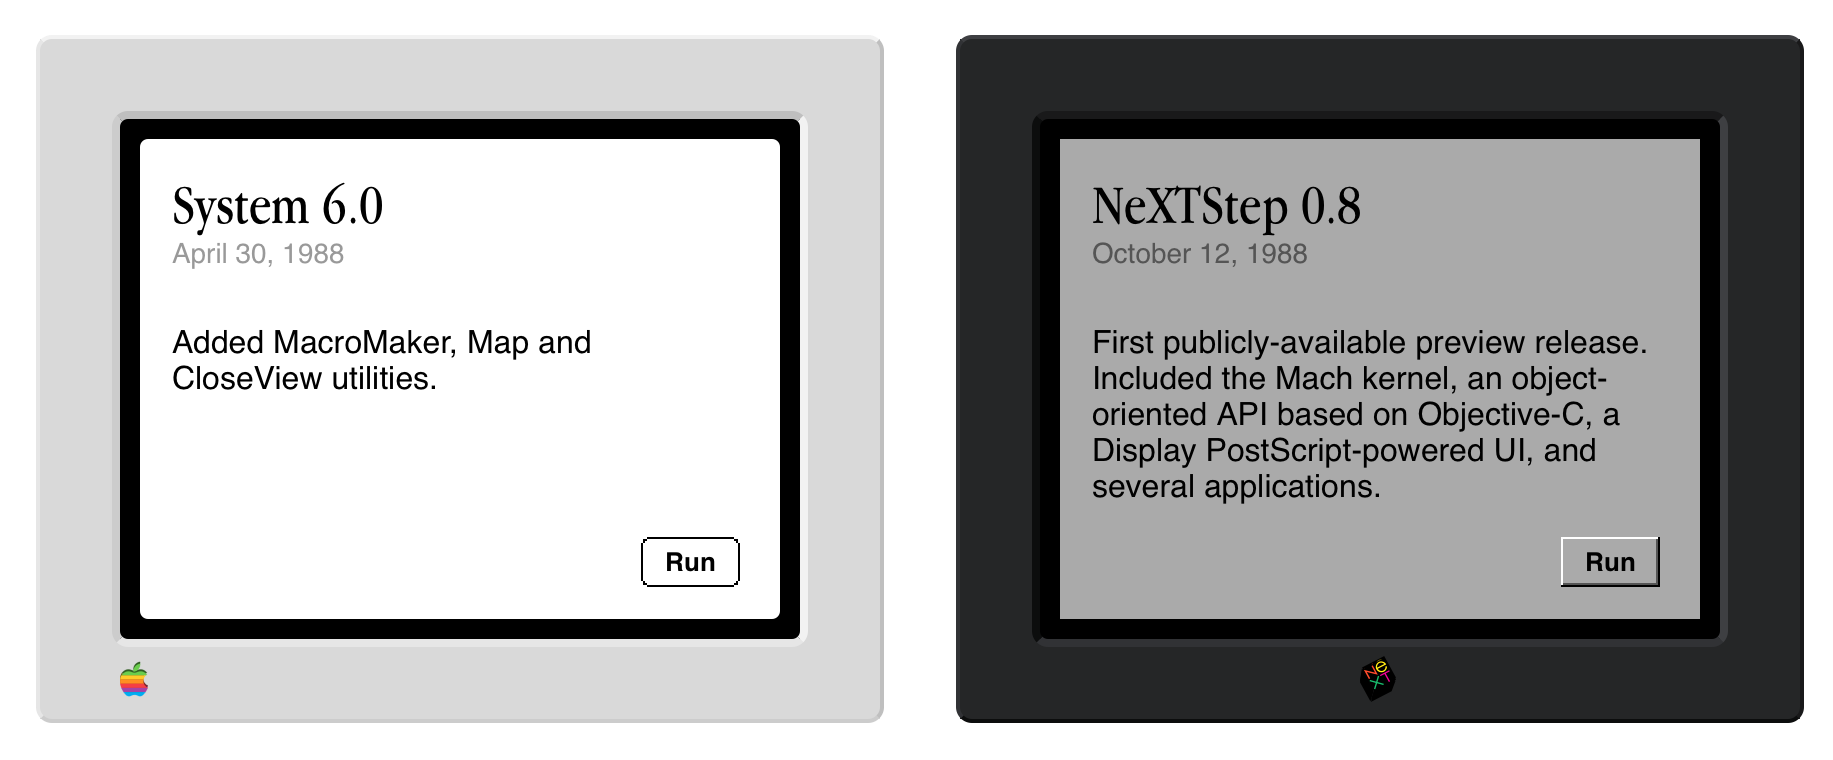 Notable OS releases of 1988: System 6.0 and NeXTStep 0.8